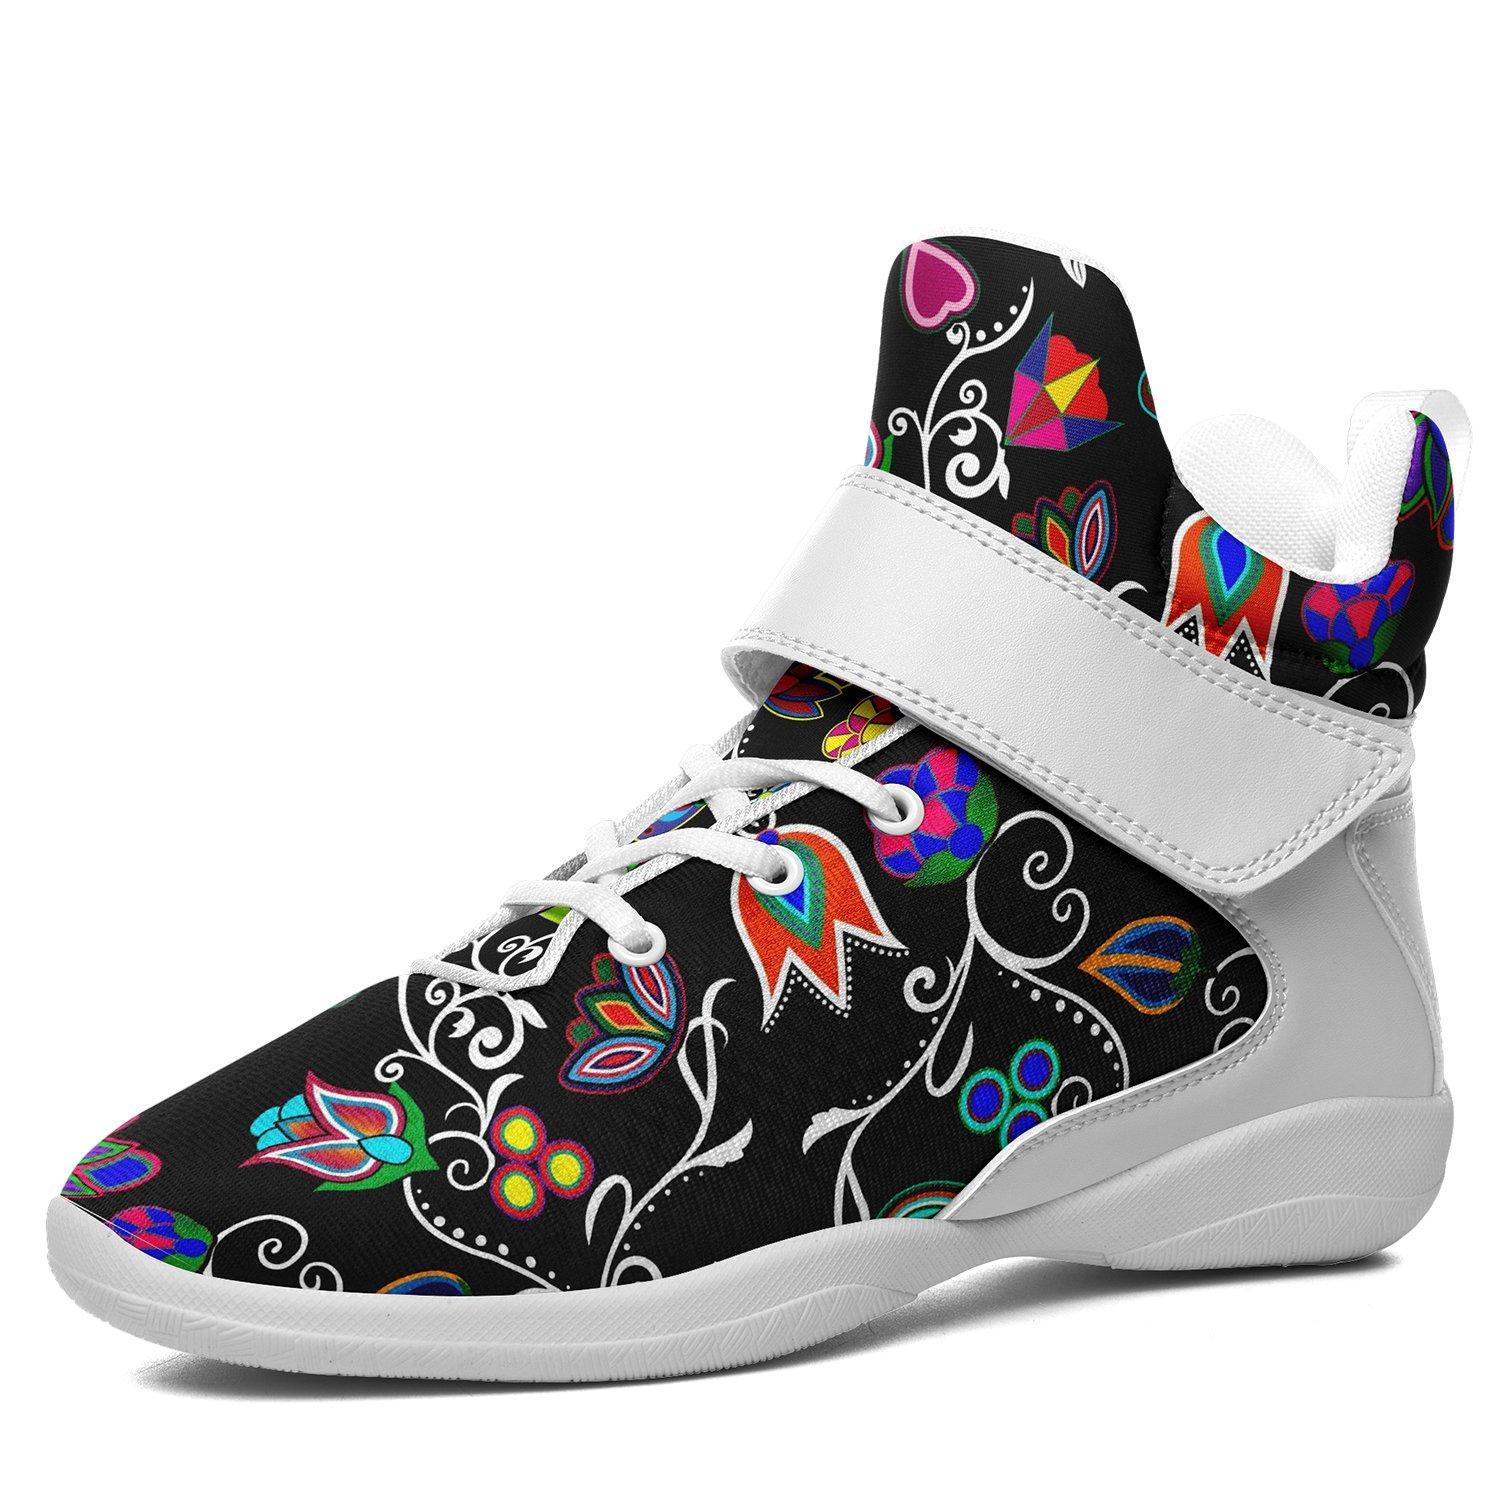 Indigenous Paisley Black Ipottaa Basketball / Sport High Top Shoes - White Sole 49 Dzine US Men 7 / EUR 40 White Sole with White Strap 